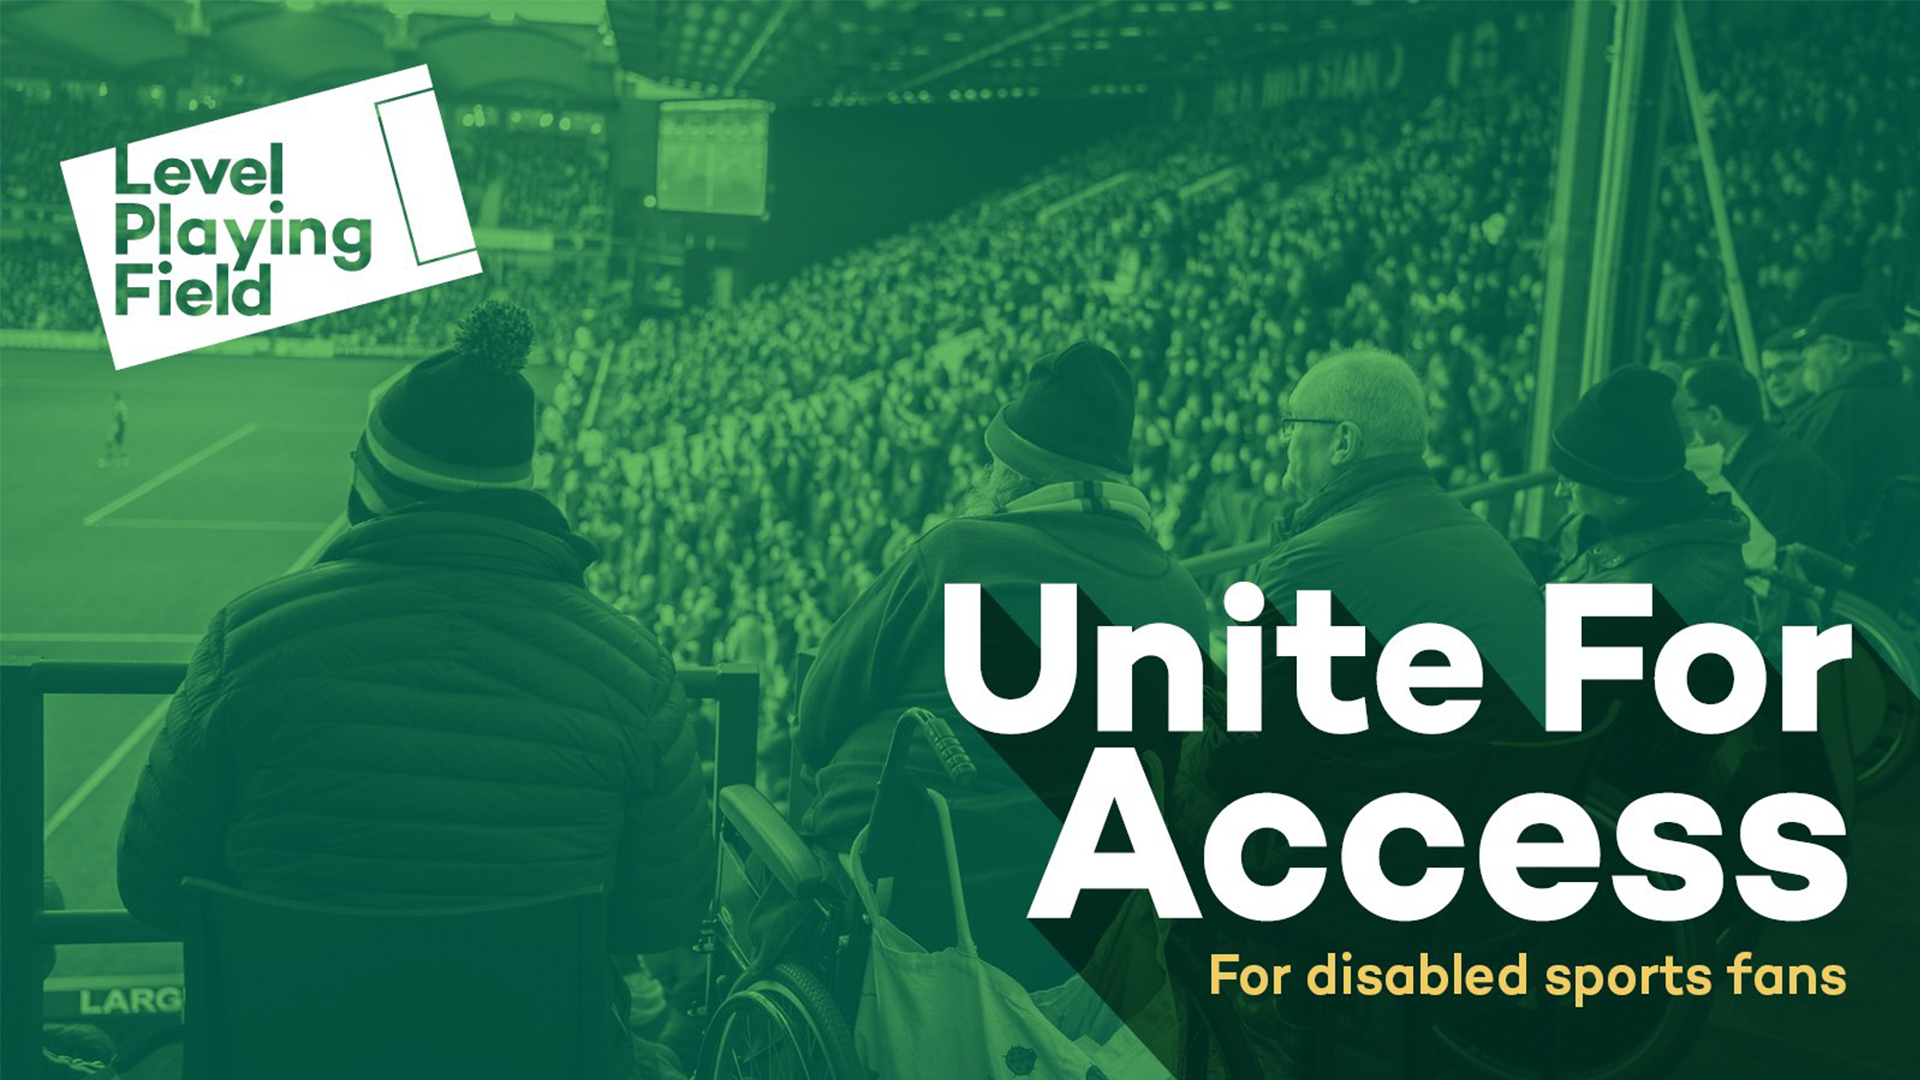 Level Playing Field’s Unite for Access Campaign